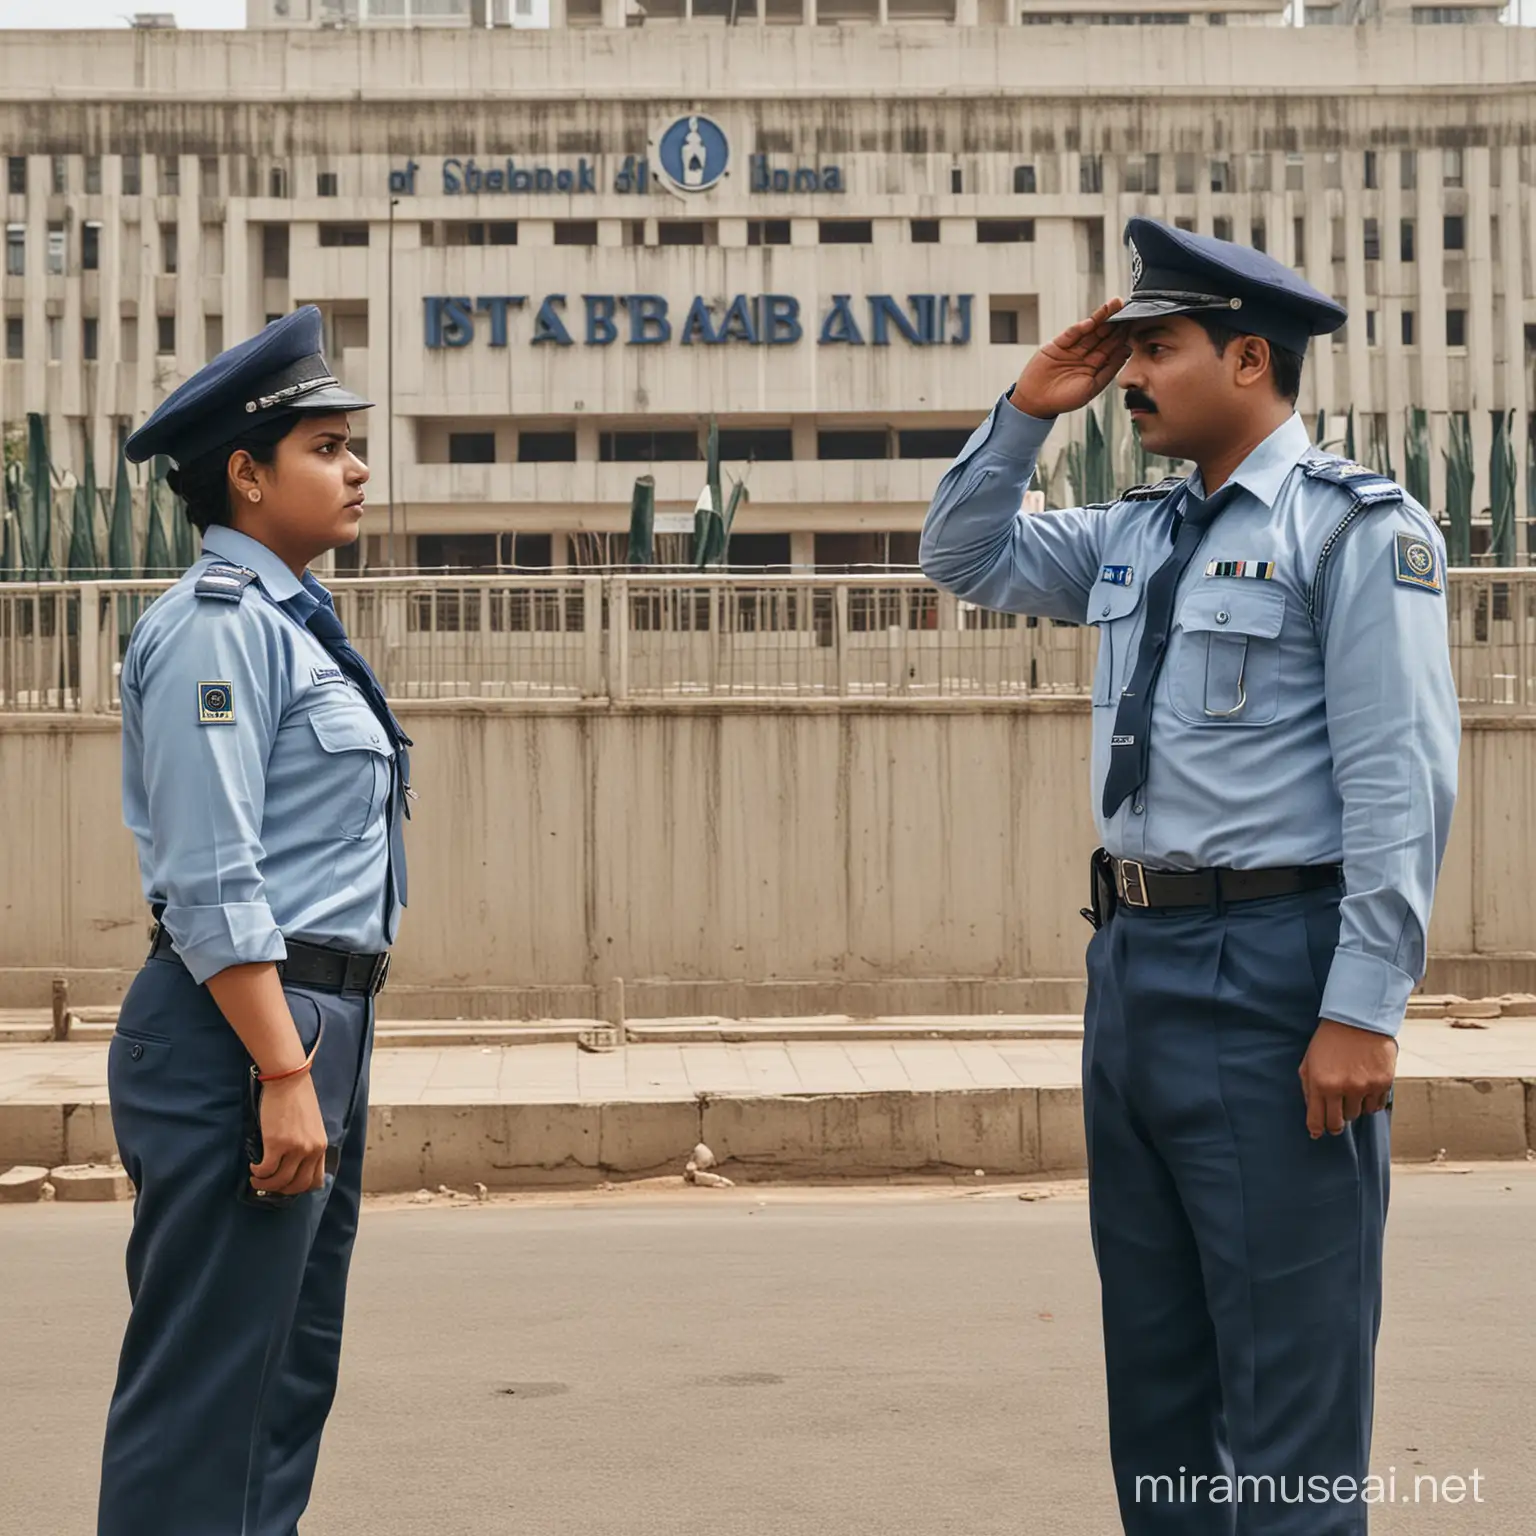 state bank of india security gaurd, salute
